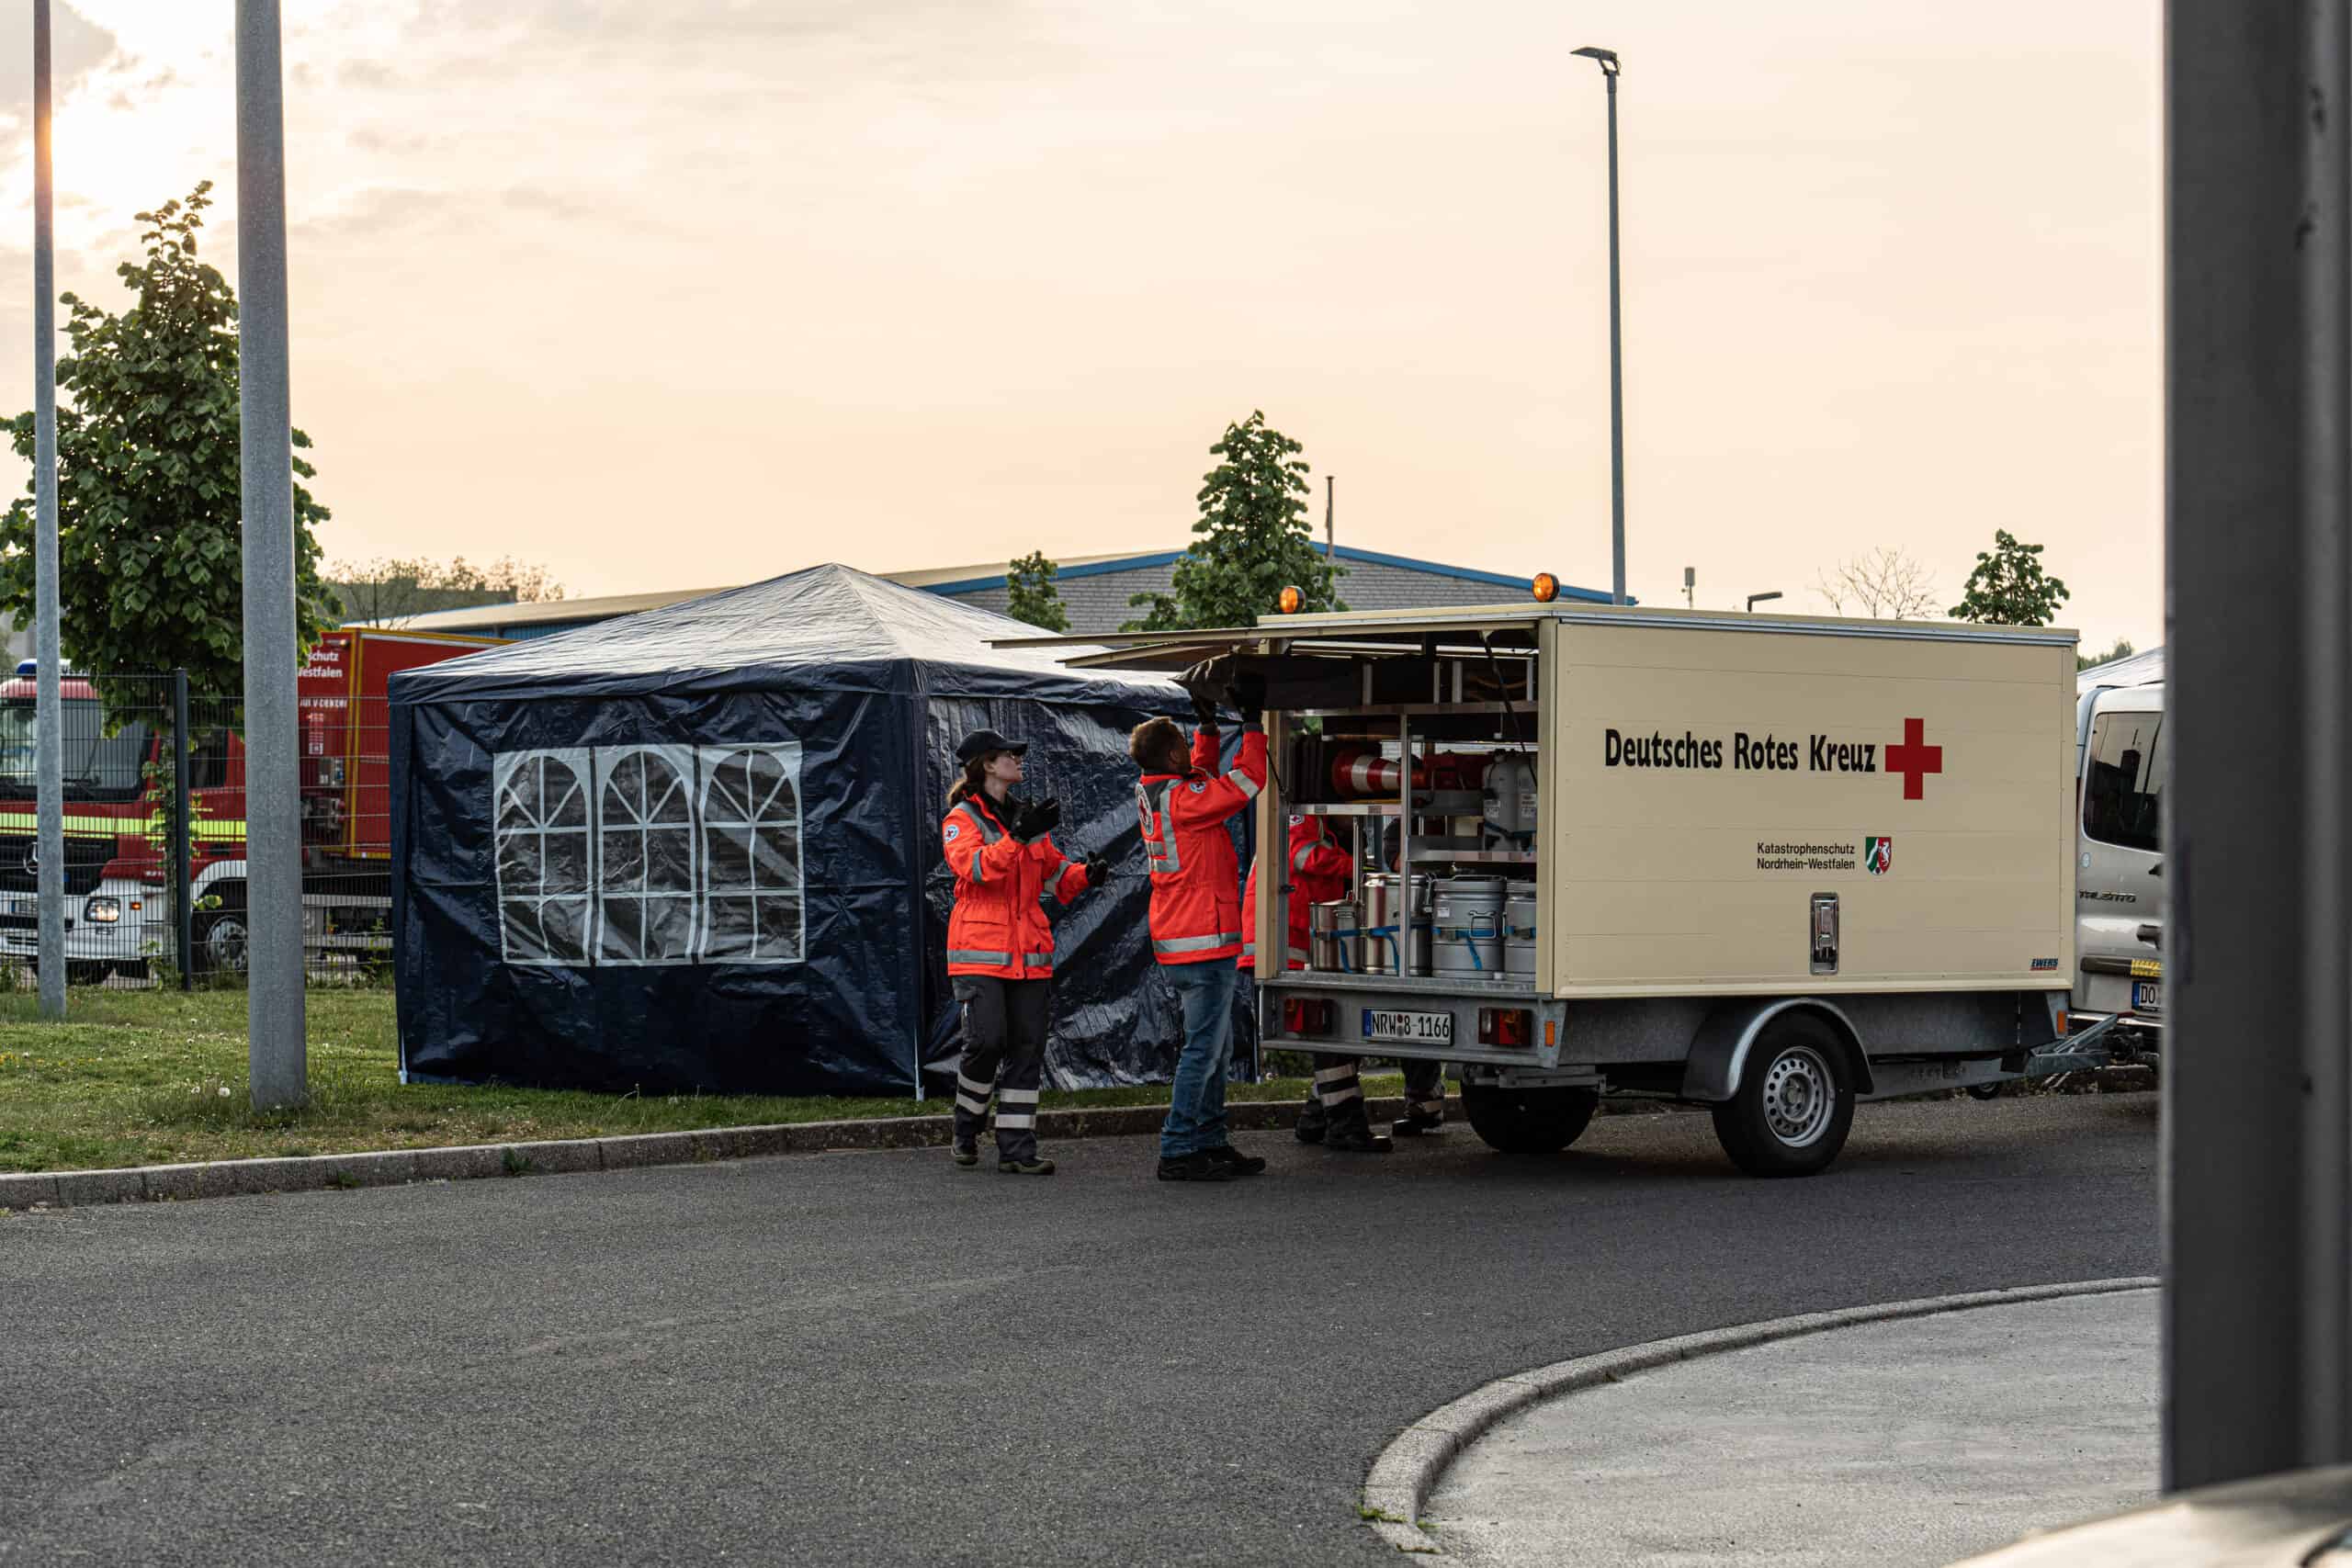 Two staff of German Red Cross Dortmund are unloading equipment from the van